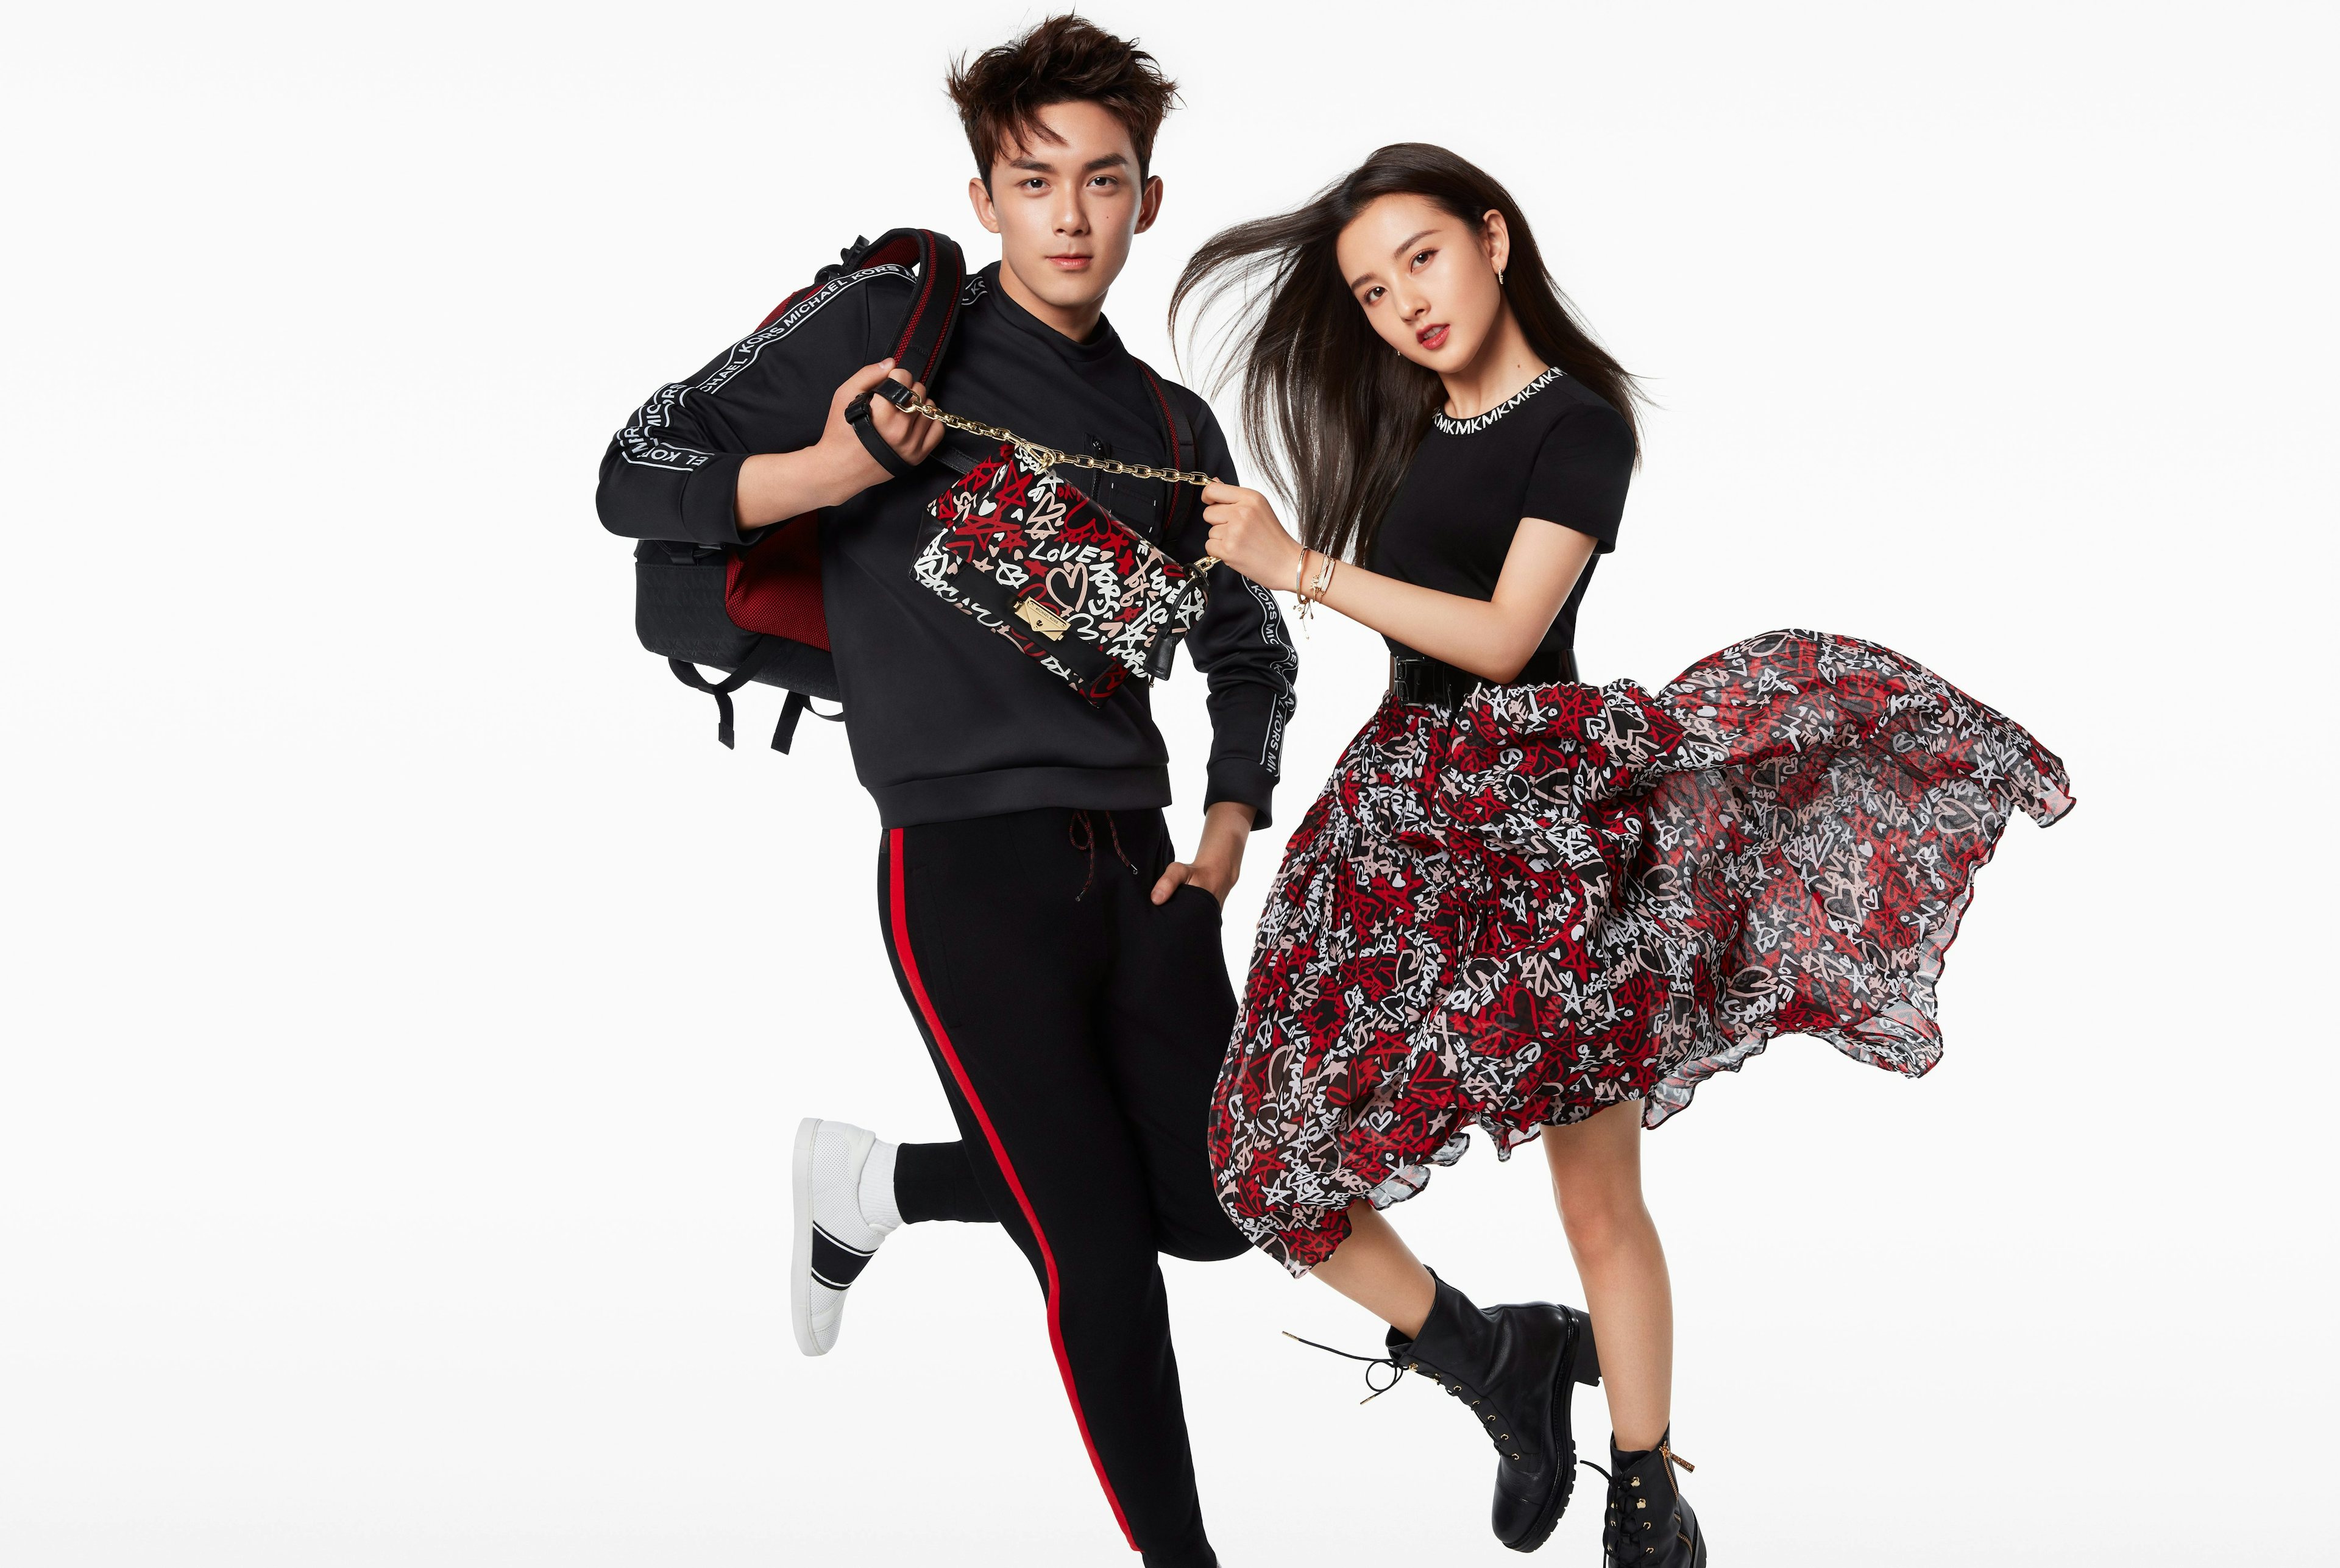 Leo Wu and Loraine Song starred in Michael Kor's 2019 Qixi campaign. Photo: courtesy of Michael Kors